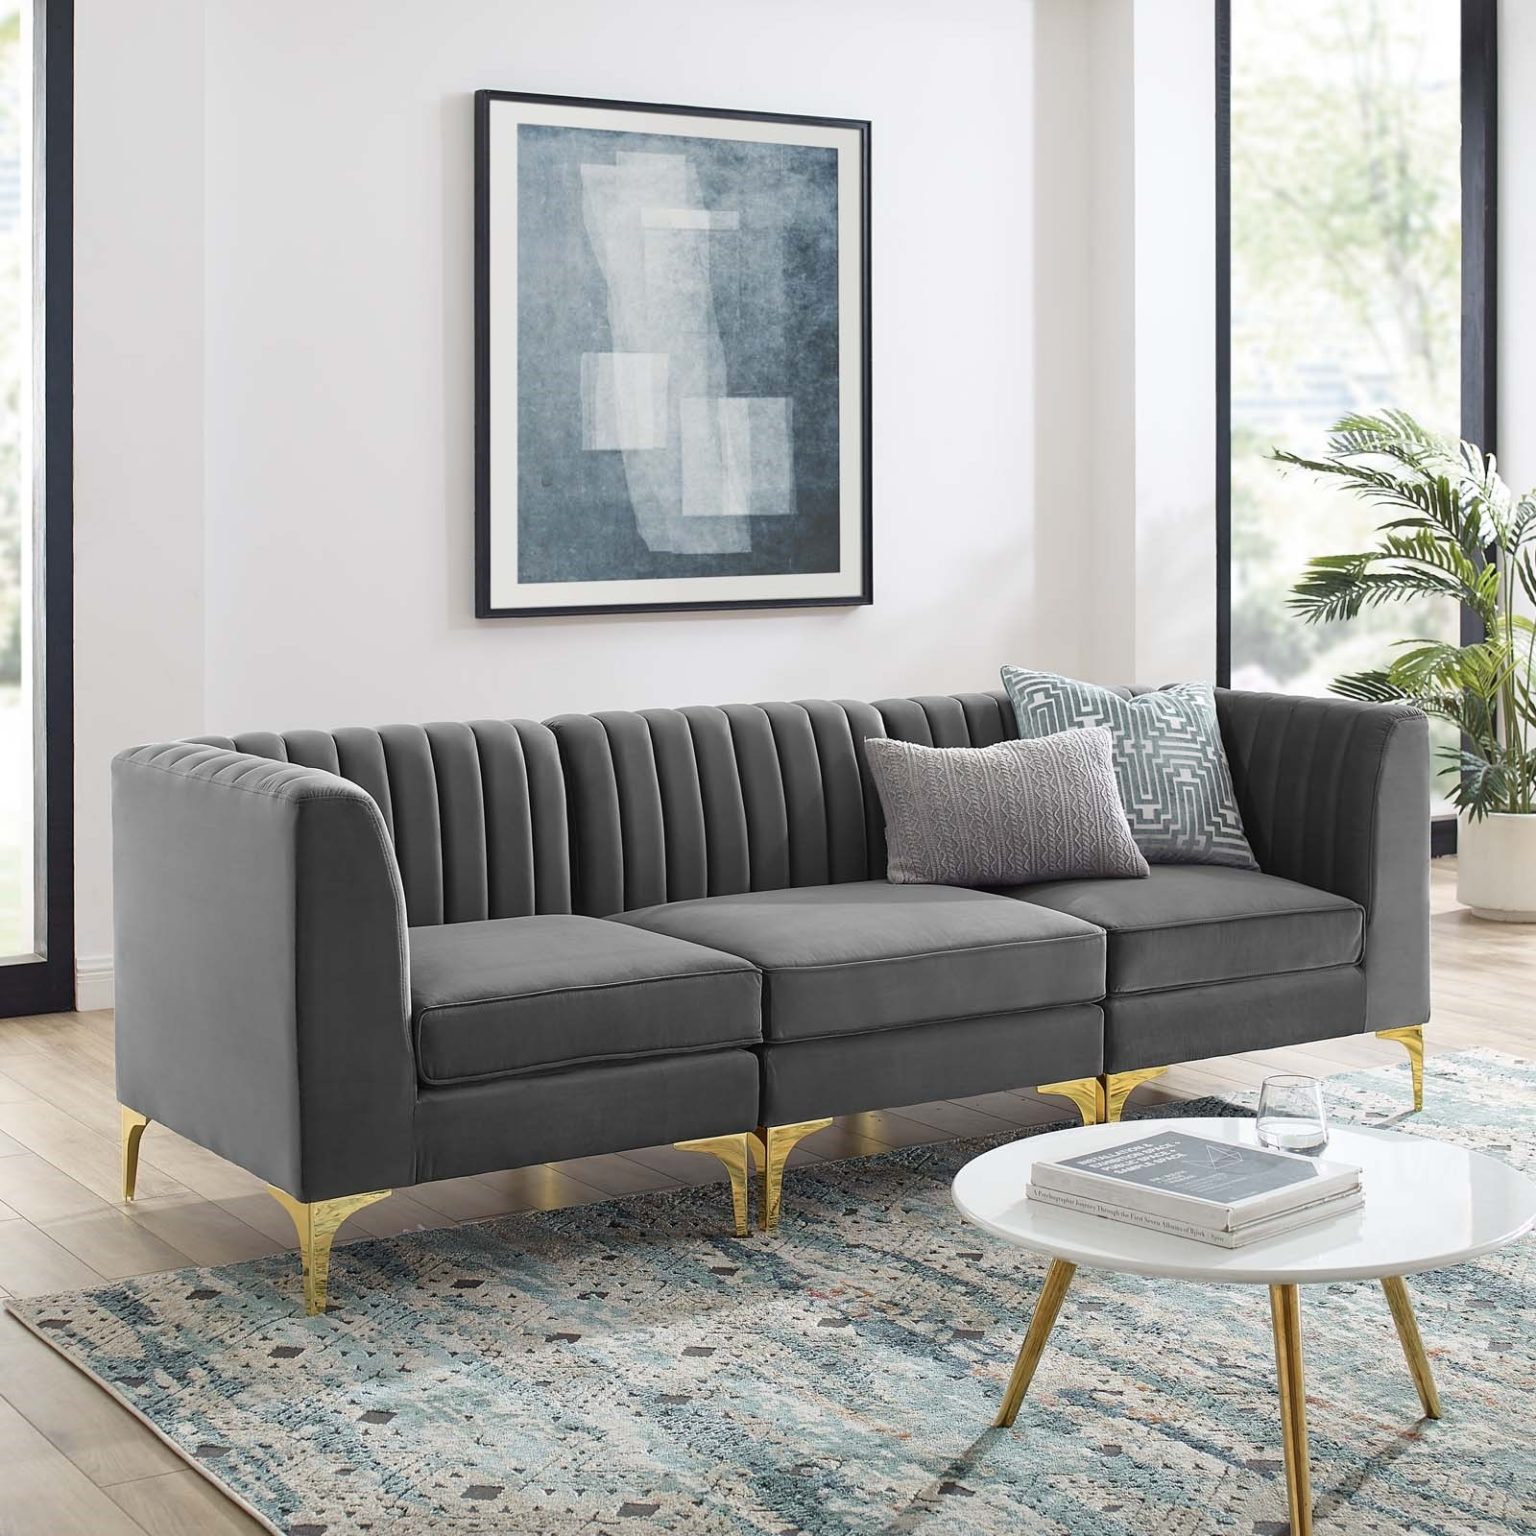 Triumph Channel Tufted Performance Velvet 3-Seater Sofa in Gray - Hyme